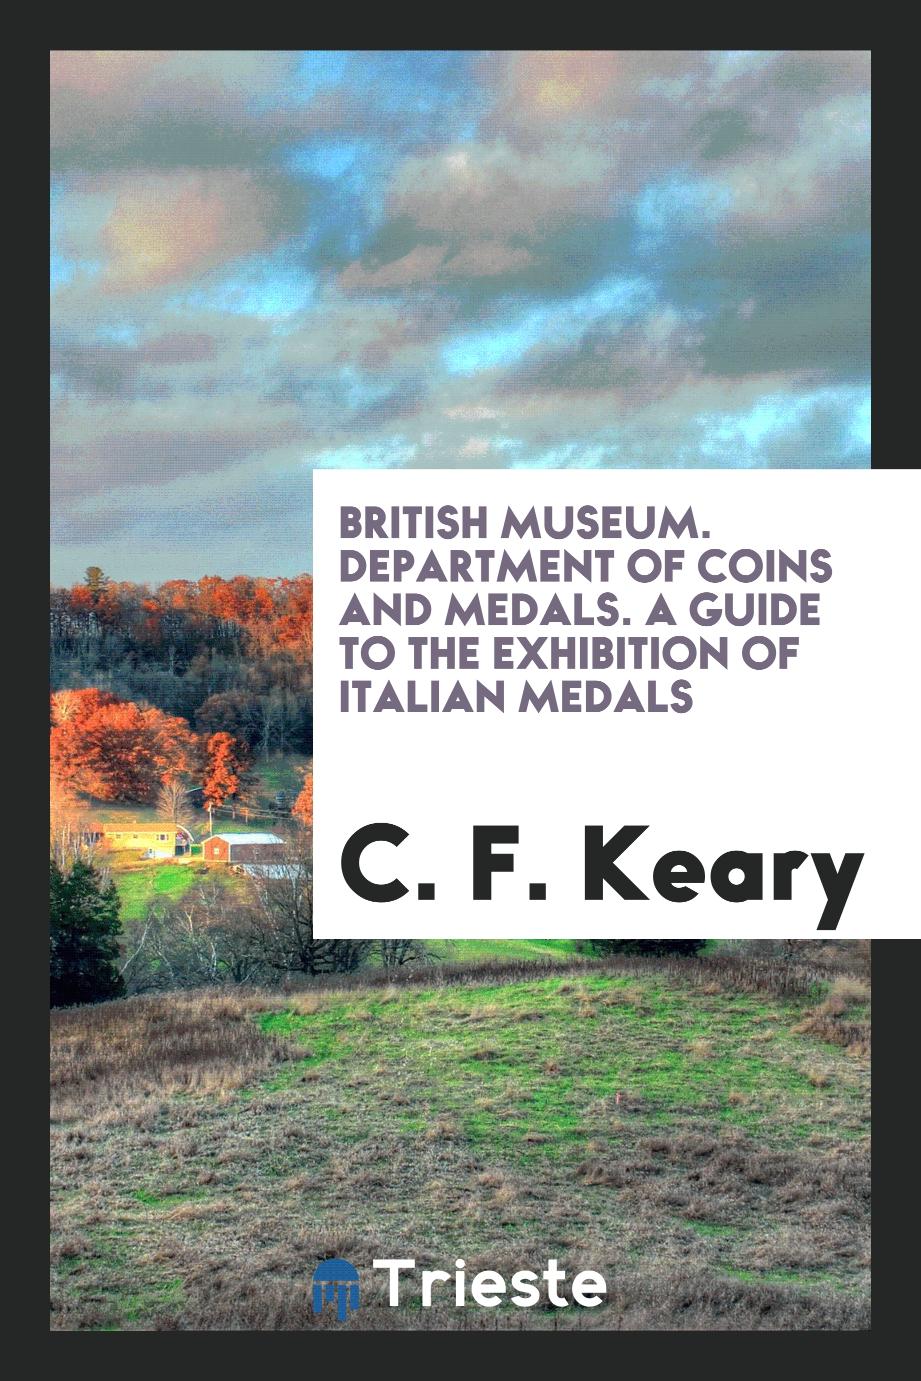 British Museum. Department of Coins and Medals. A Guide to the Exhibition of Italian Medals